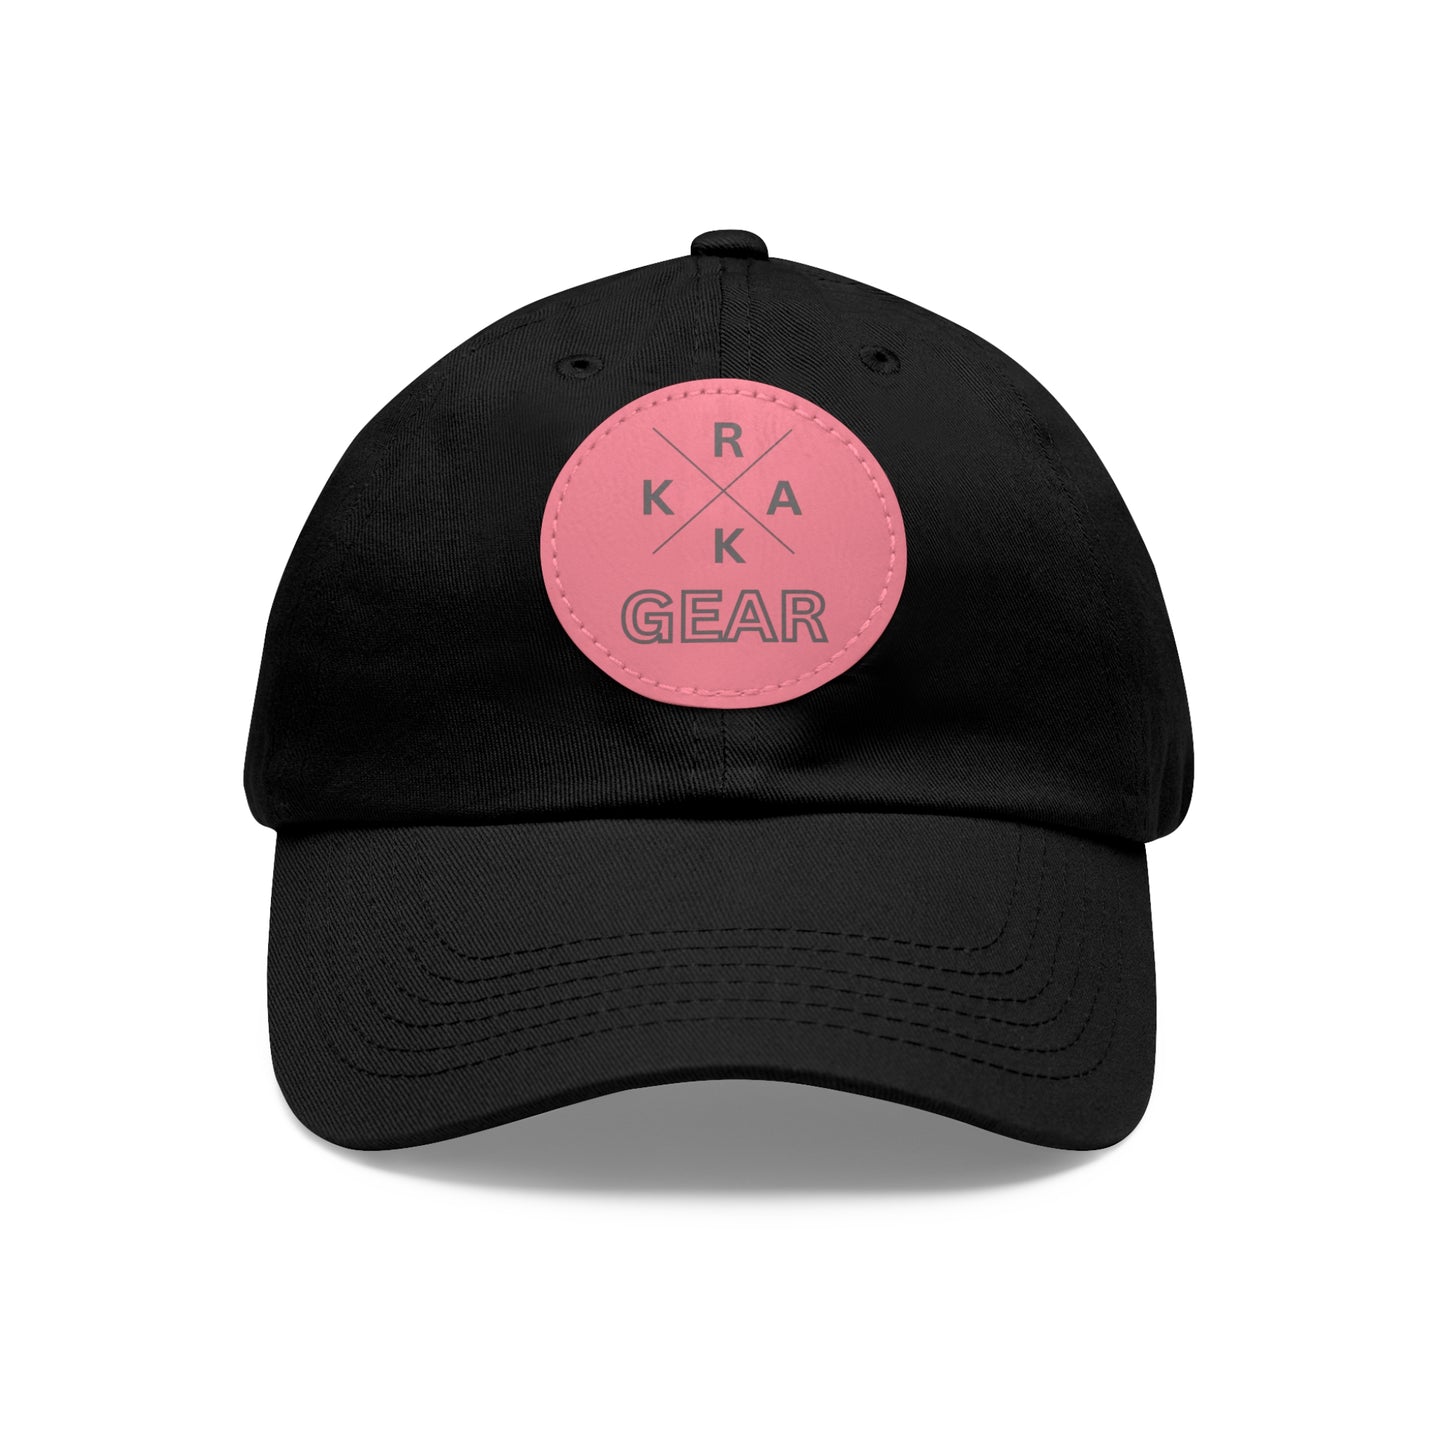 Rakkgear Black Hat with Pink Leather X Logo Patch: Cap featuring the iconic Rakkgear X Logo on a finely embroidered leather patch on the front